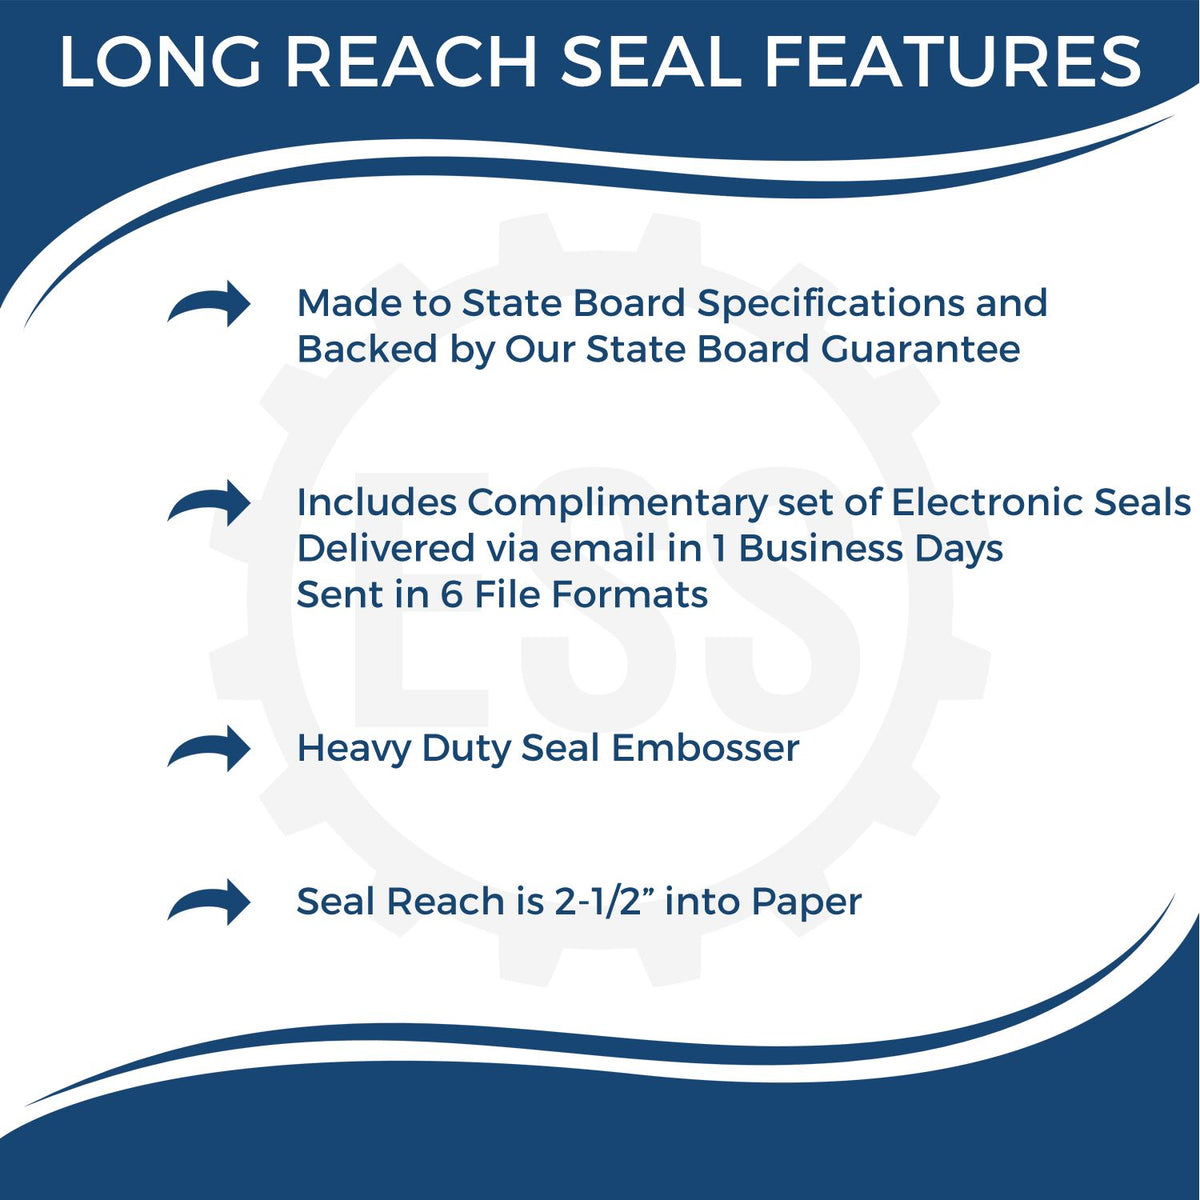 A picture of an infographic highlighting the selling points for the Long Reach Louisiana PE Seal